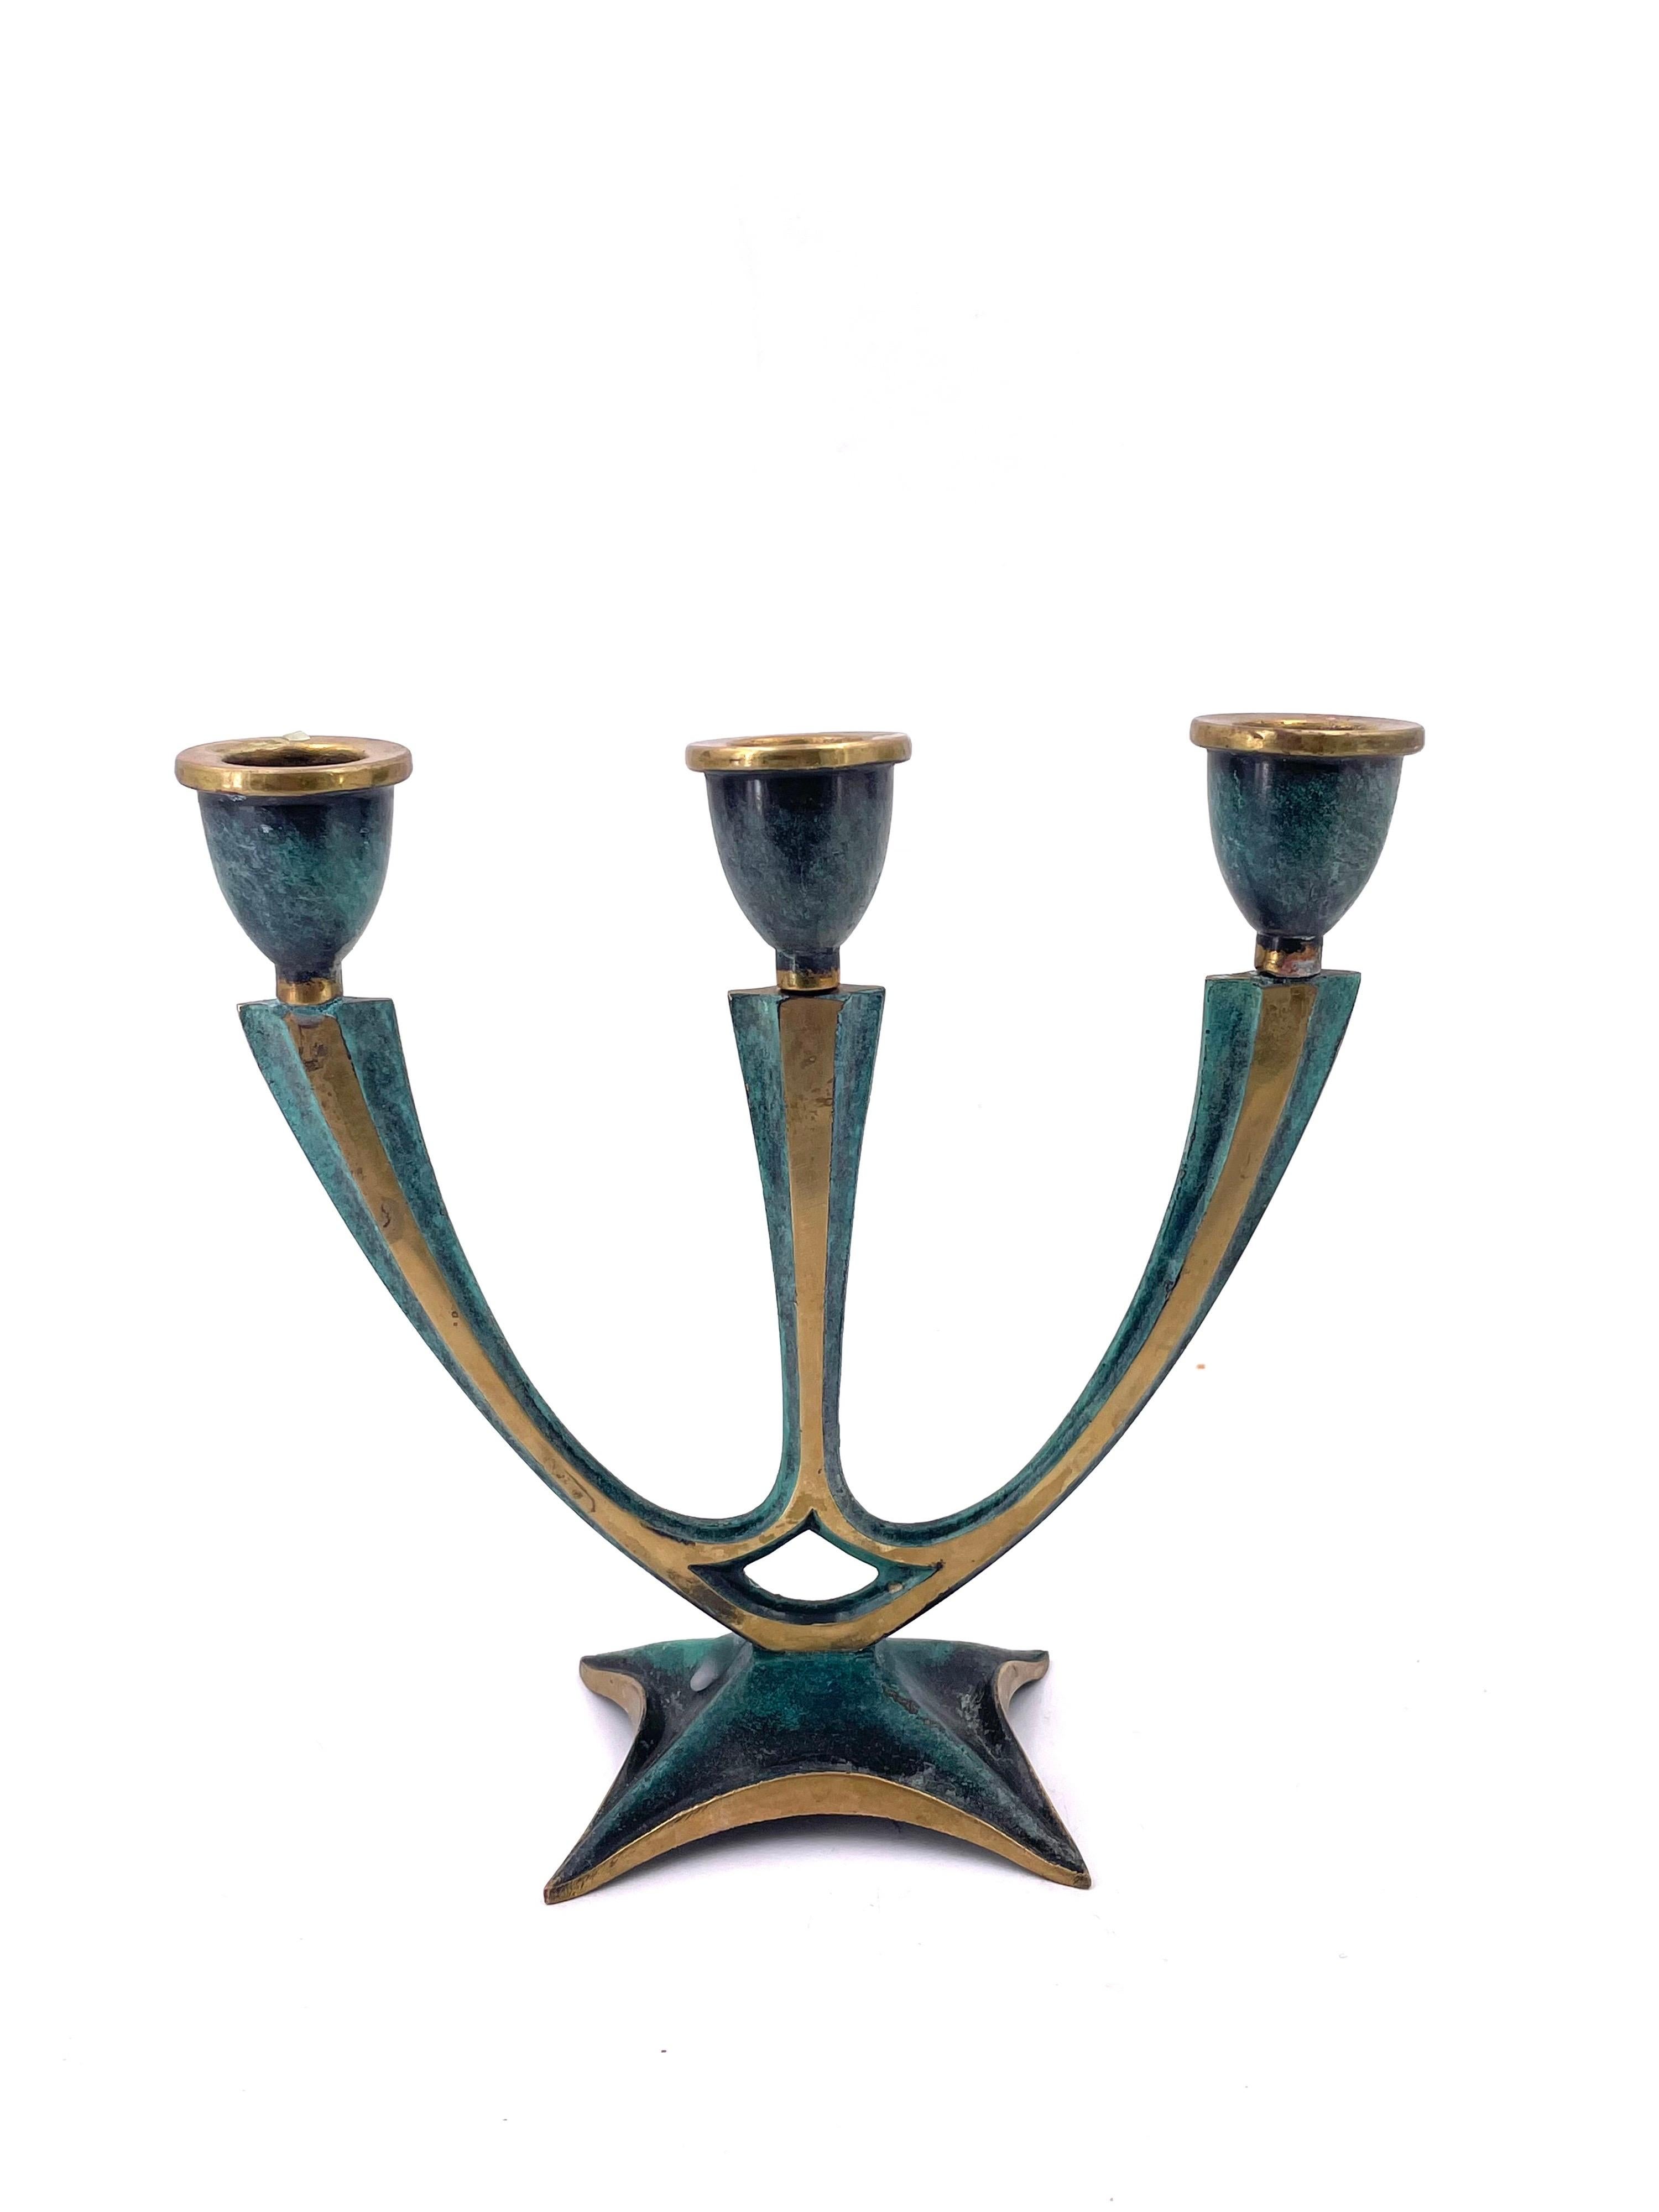 Vintage midcentury candleholders, brass with faux green patina (painted). Handmade by Kadar in Israel in 1960s. Good vintage condition. Clean. Beautiful accessories that add a modernist golden touch to any space.